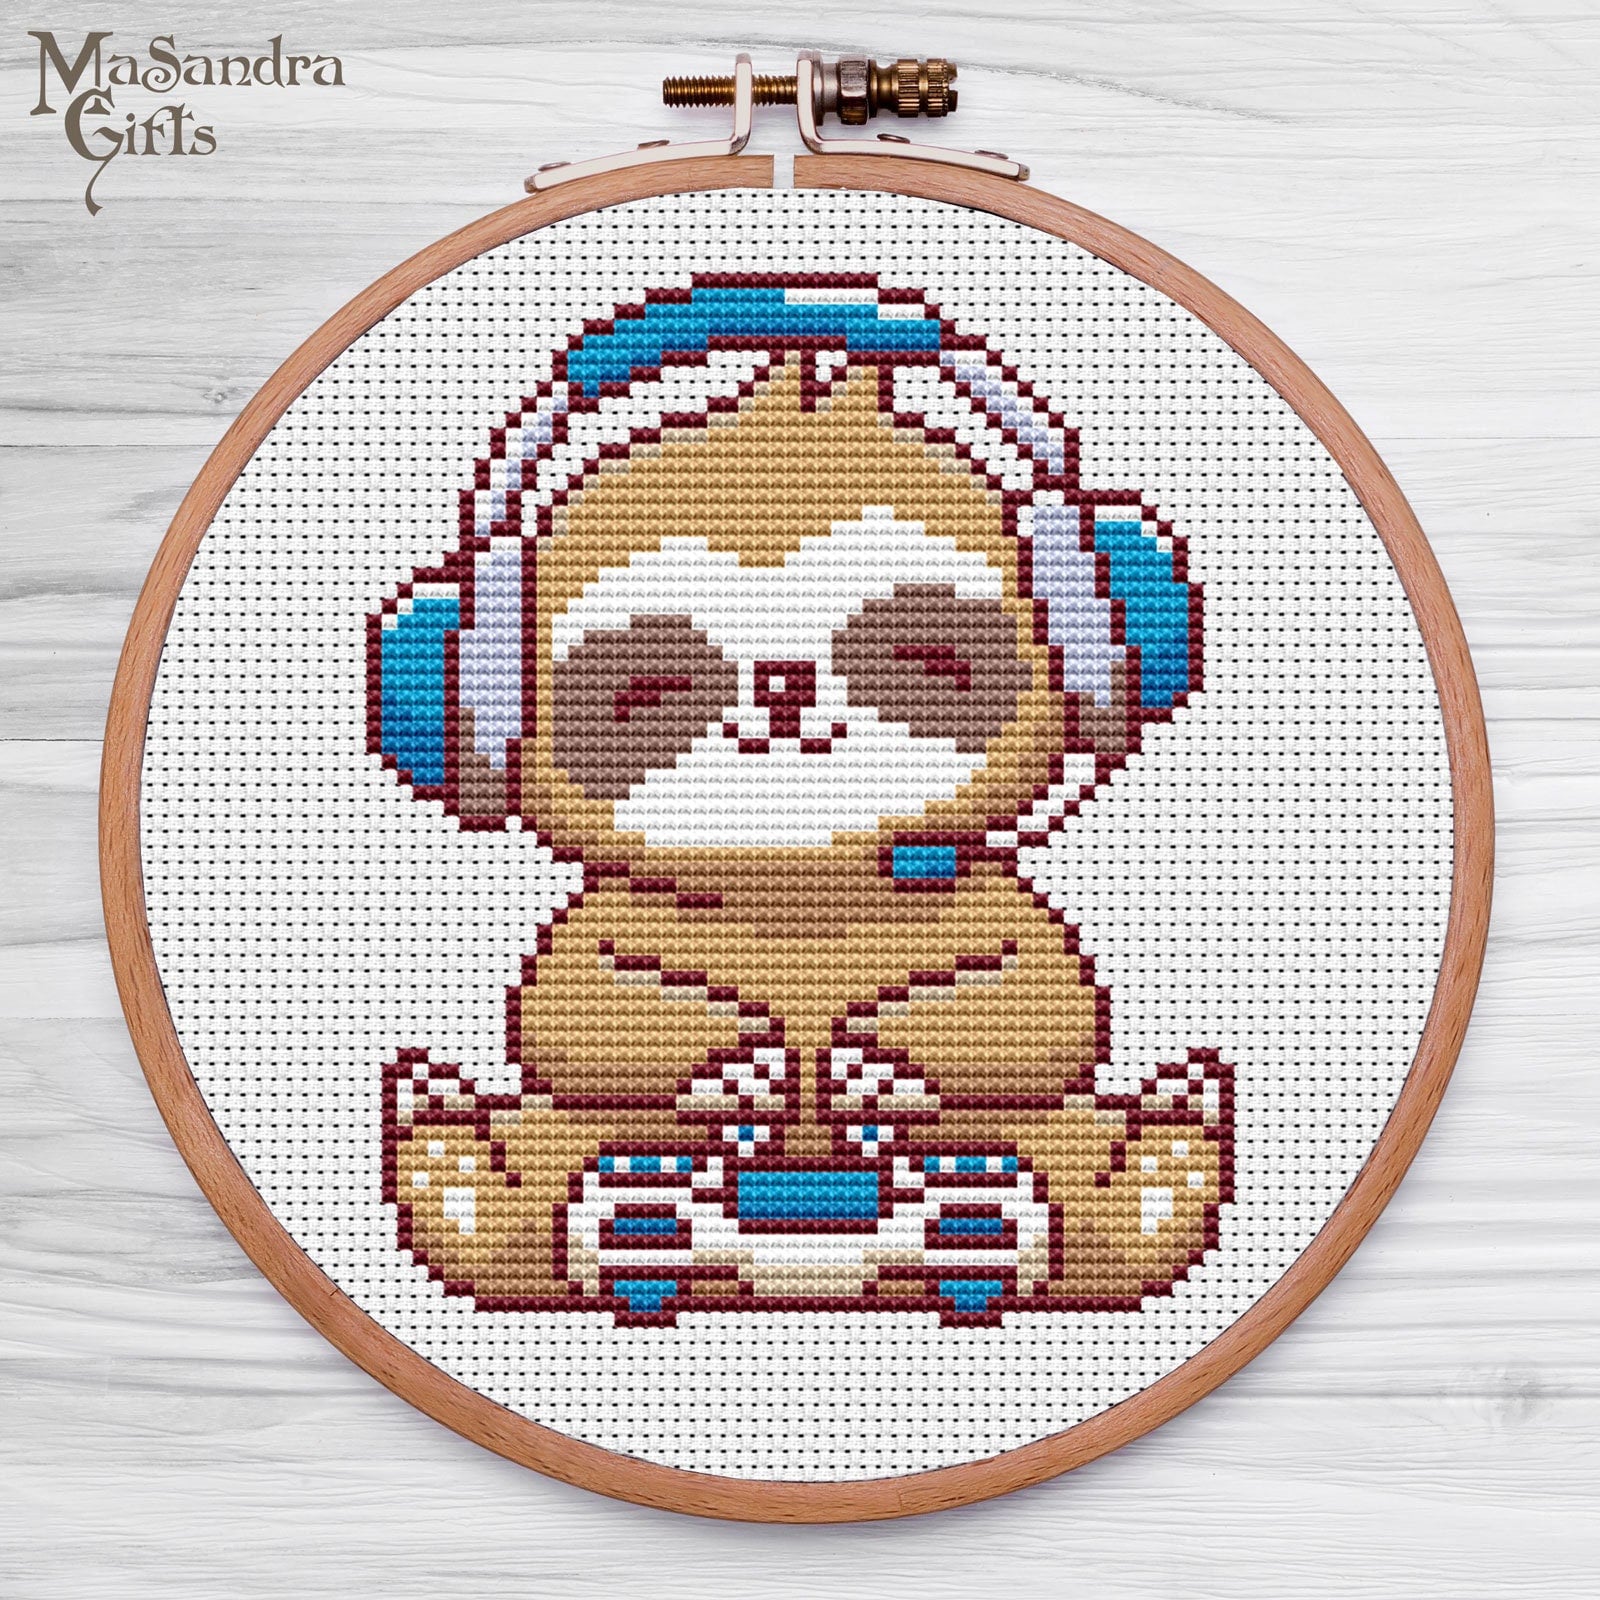 Kids Beginner Cross Stitch Kit, Happy Sloth Hanging from a Branch